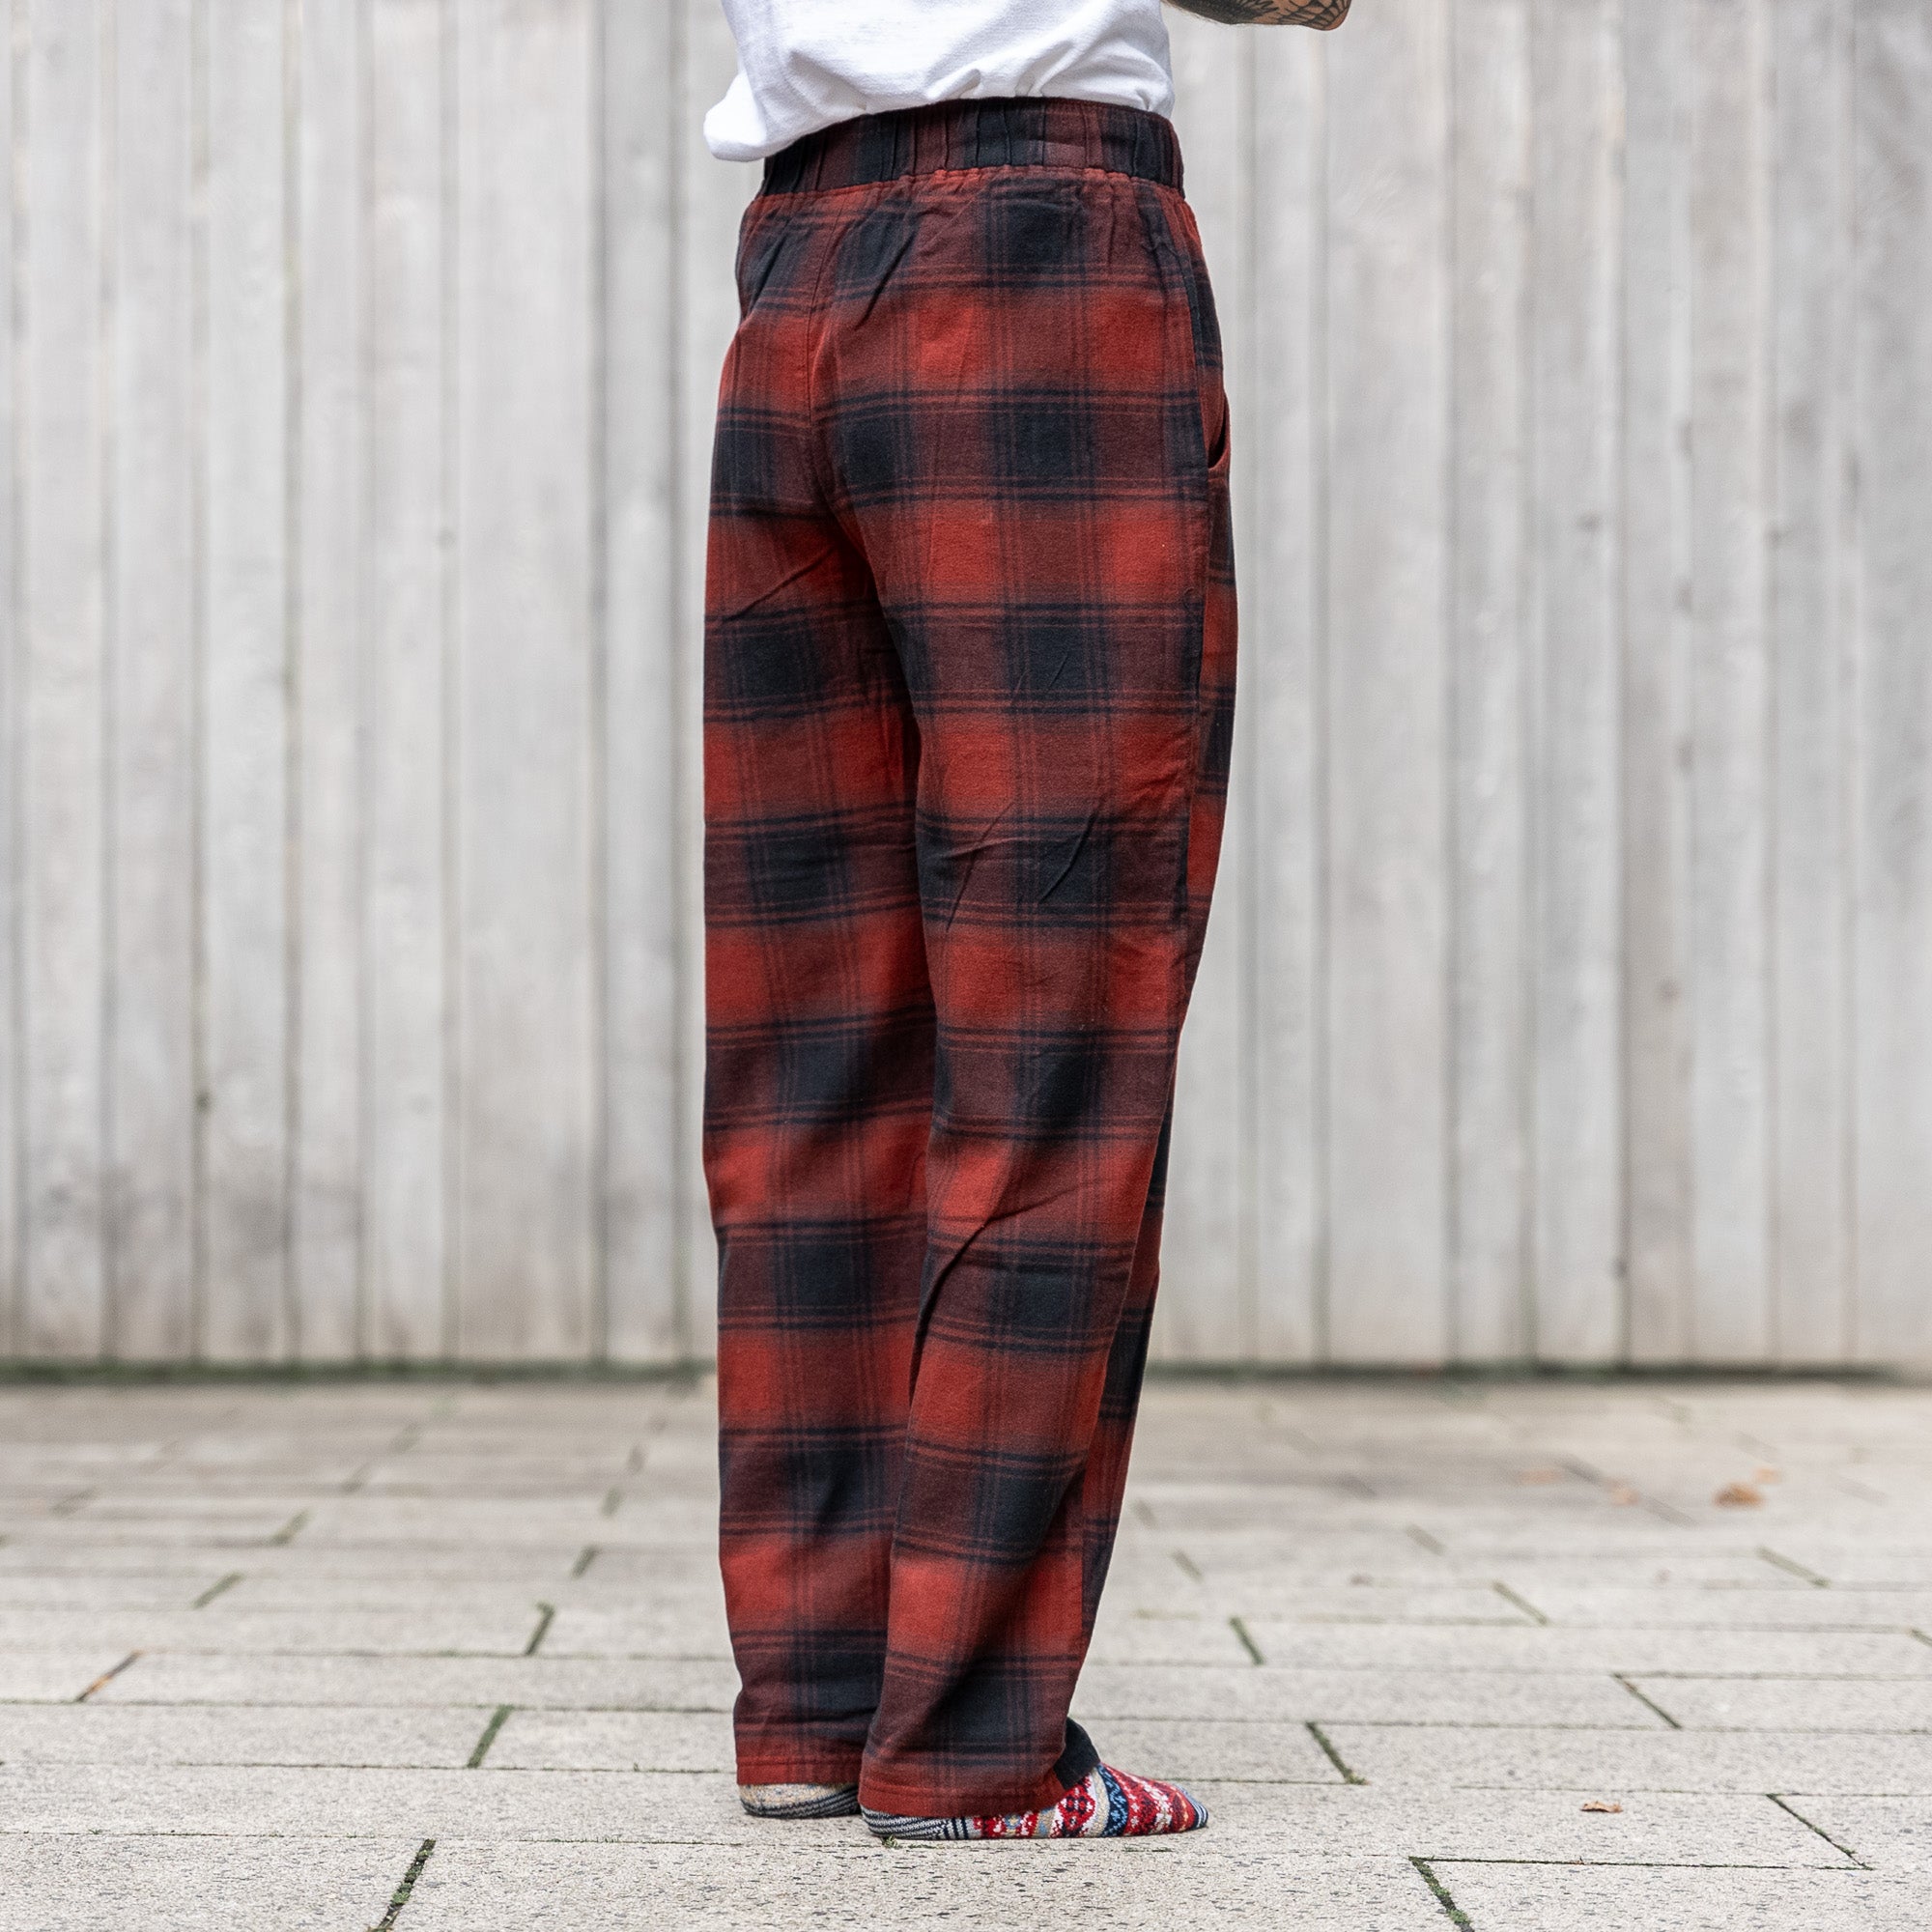 Pajama Pants, Navy Red Check Flannel